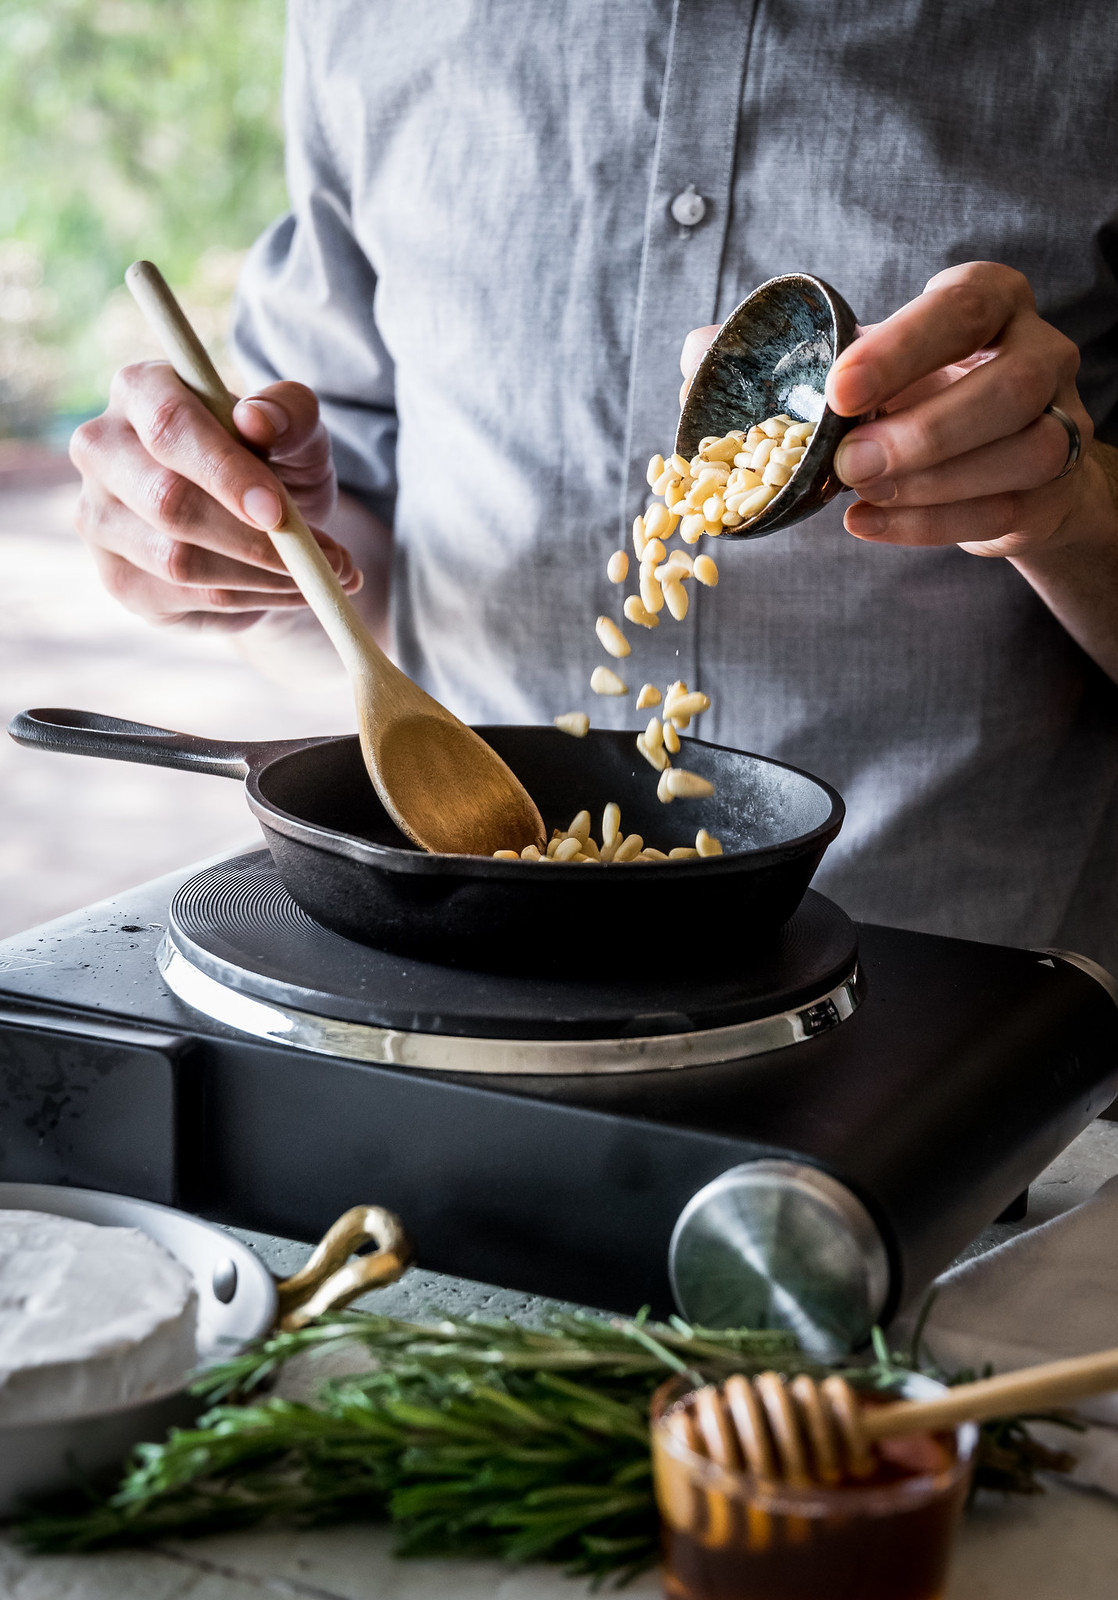 toasting the pine nuts makes them much more flavorful